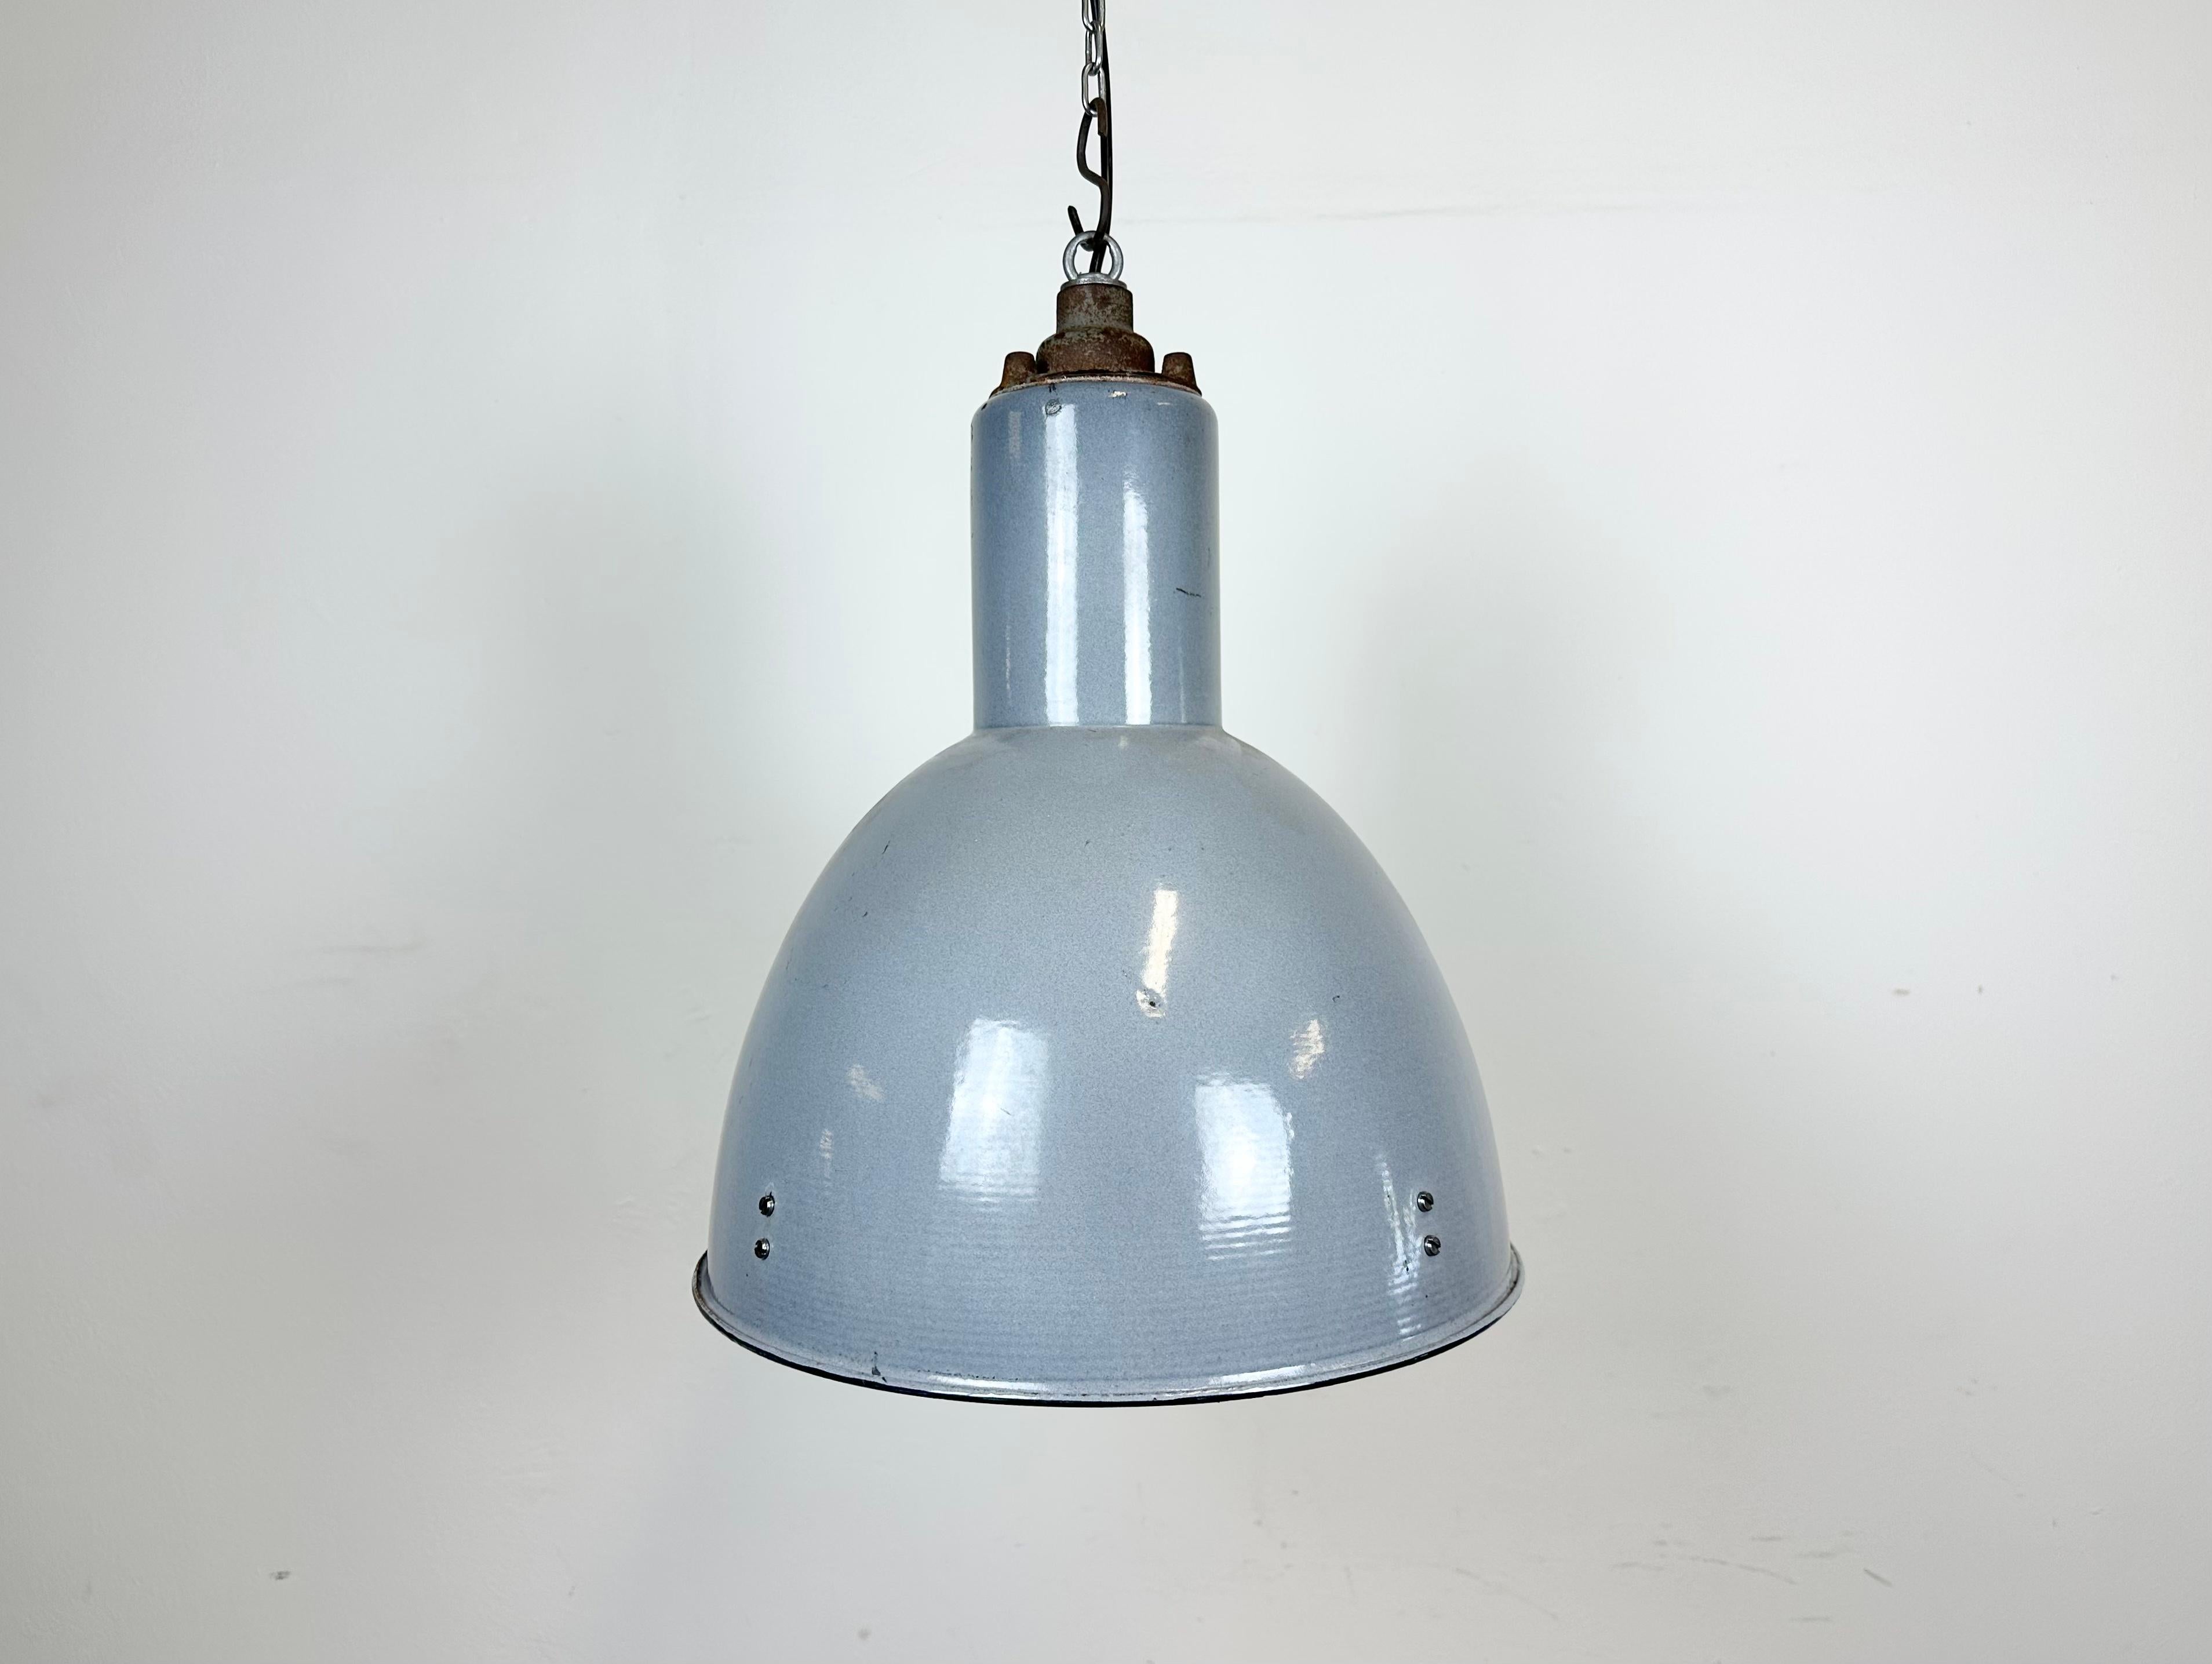 Vintage Industrial light designed in Bauhaus period made in former Czechoslovakia during the 1950s.It features a grey enamel body with white enamel interior and cast iron top. New porcelain socket requires  standard E27/E26 lightbulbs. New wire. The